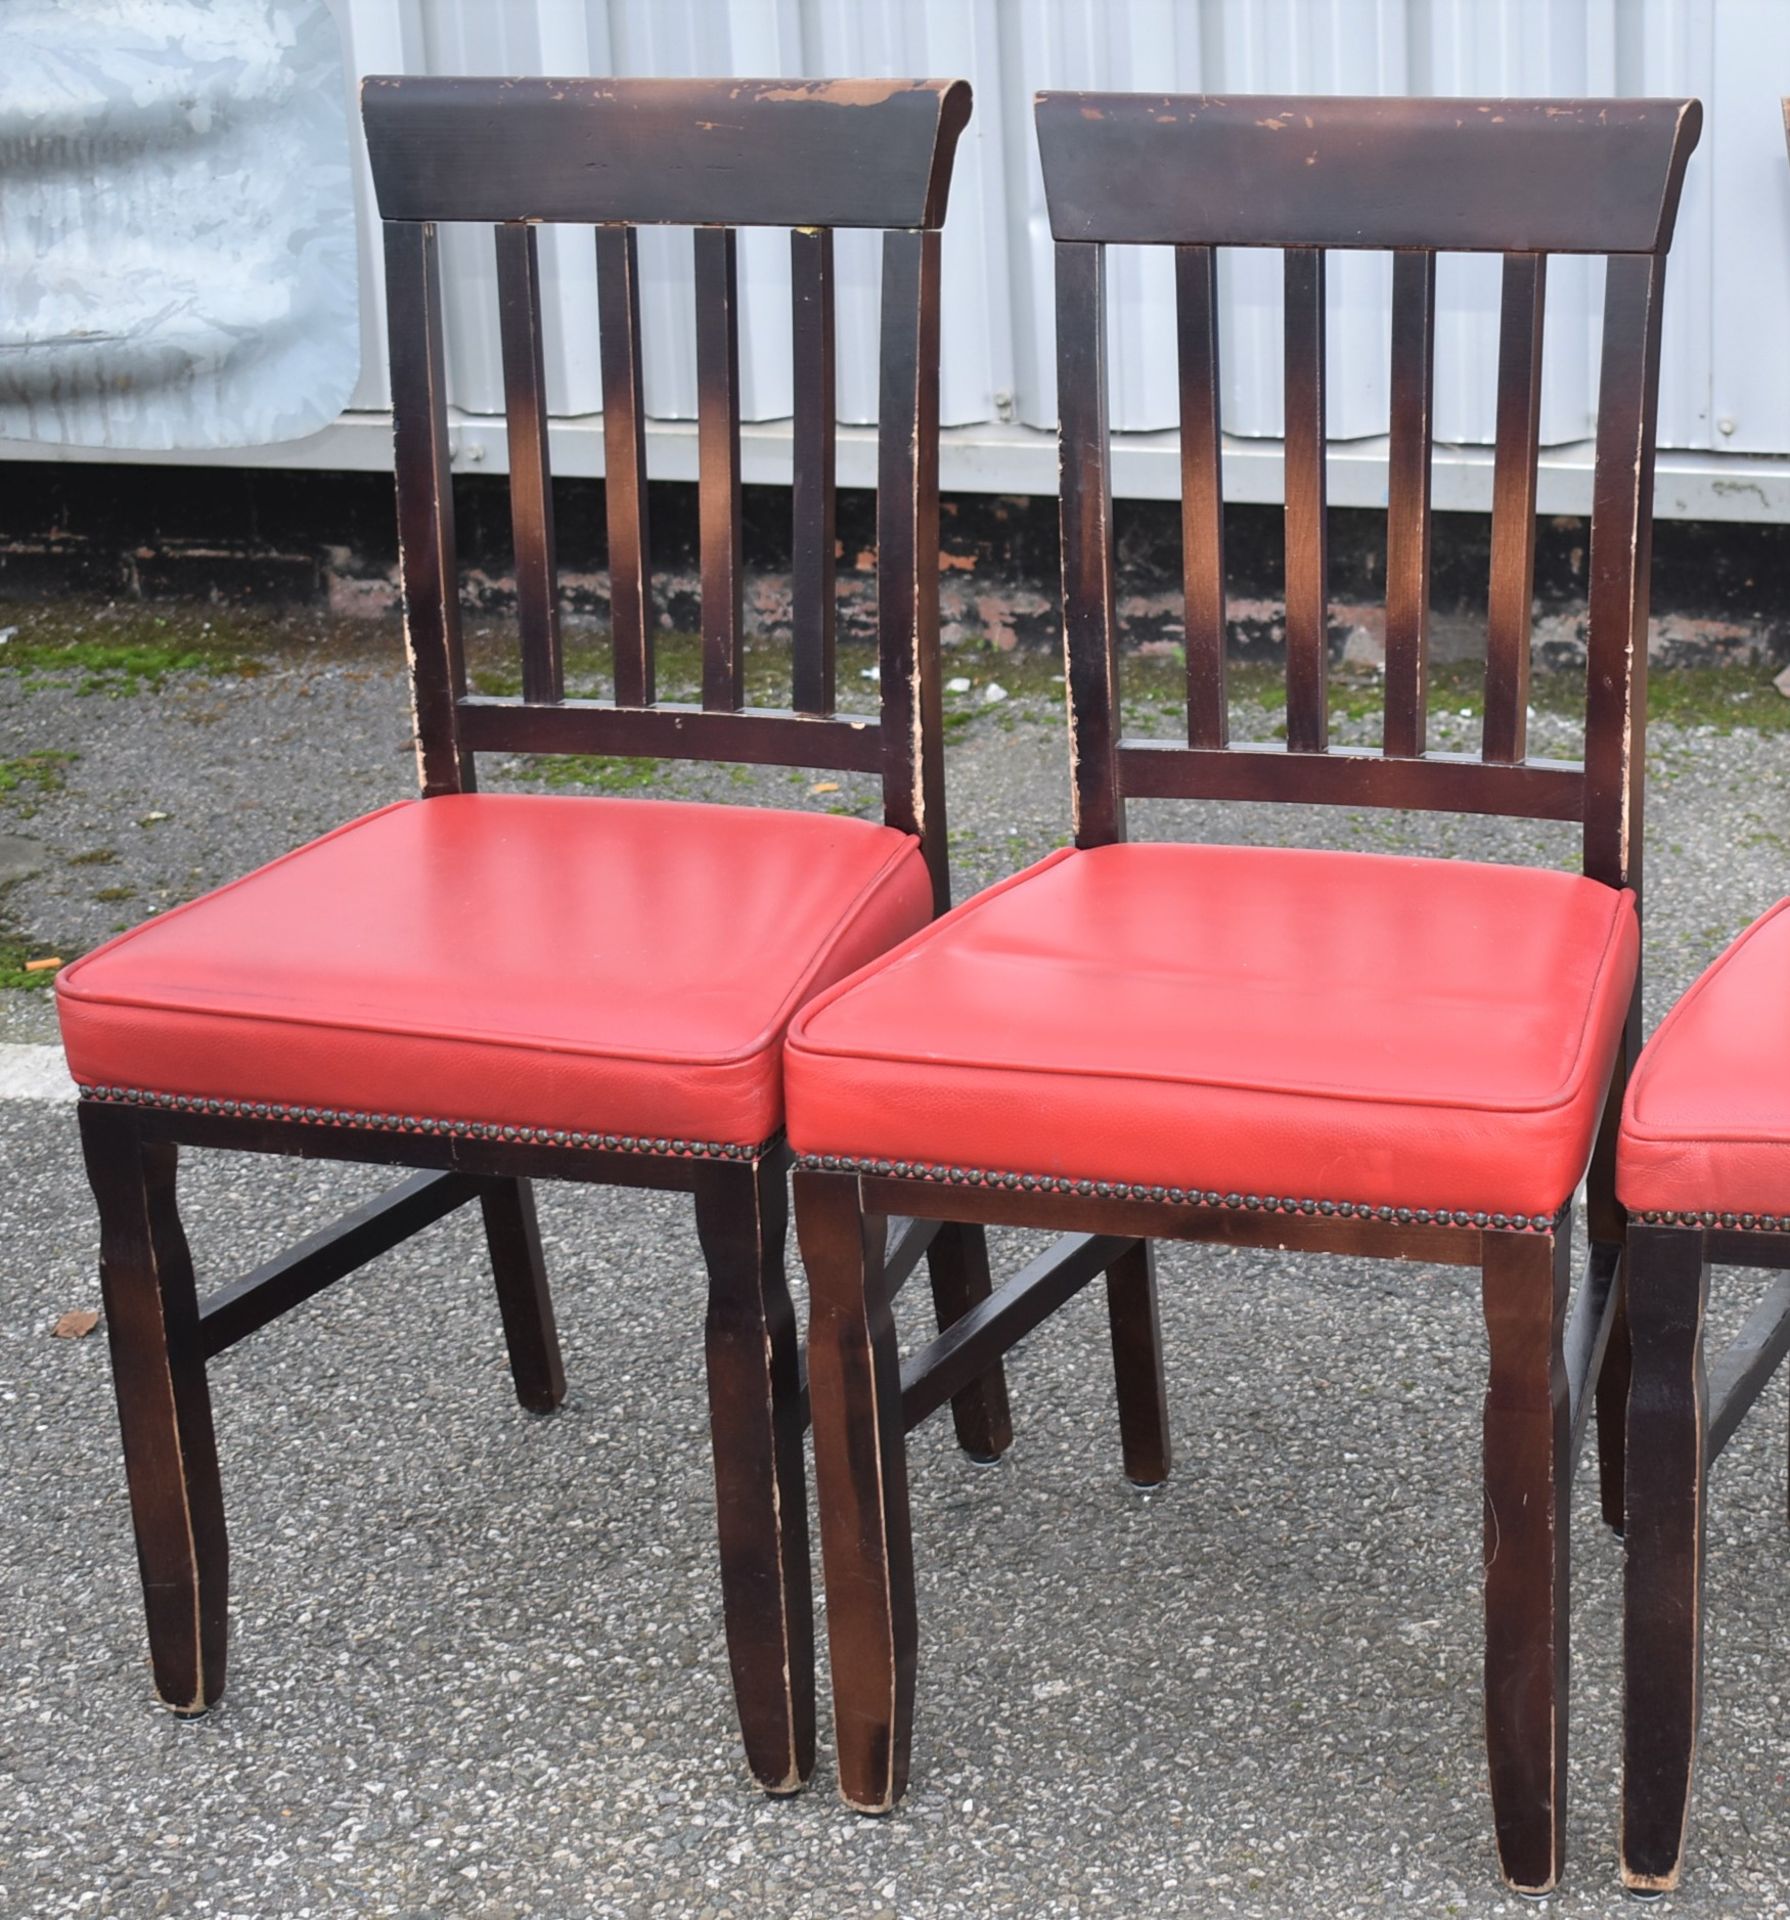 8 x Restaurant Dining Chairs With Dark Stained Wood Finish and Red Leather Seat Pads - Image 3 of 5